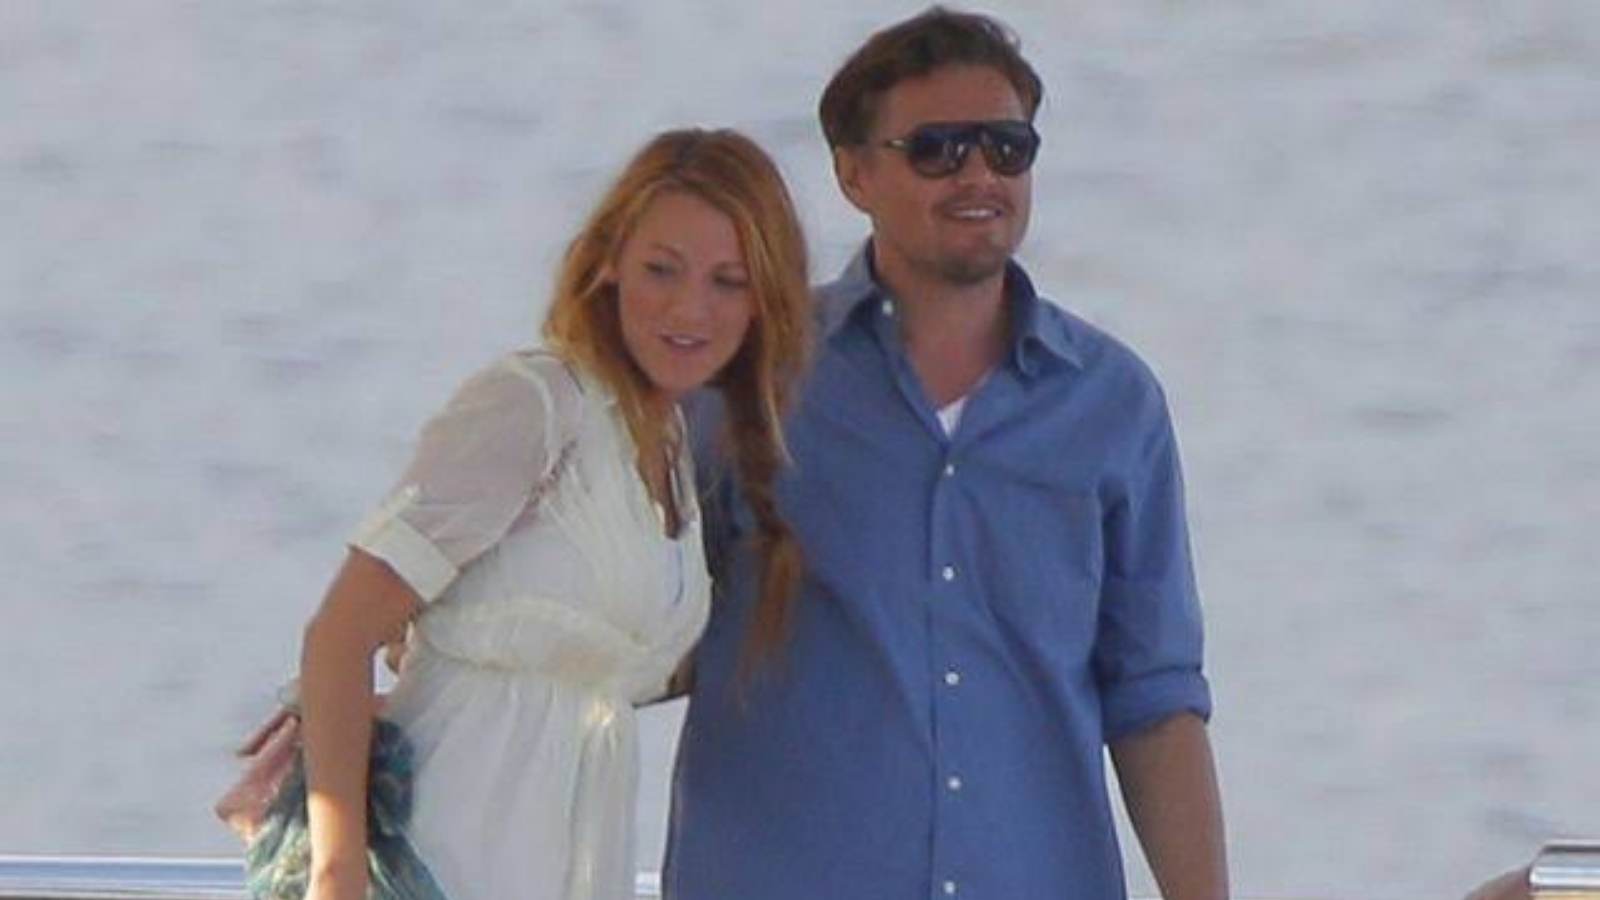 Blake Lively and Leonardo DiCaprio at Cannes